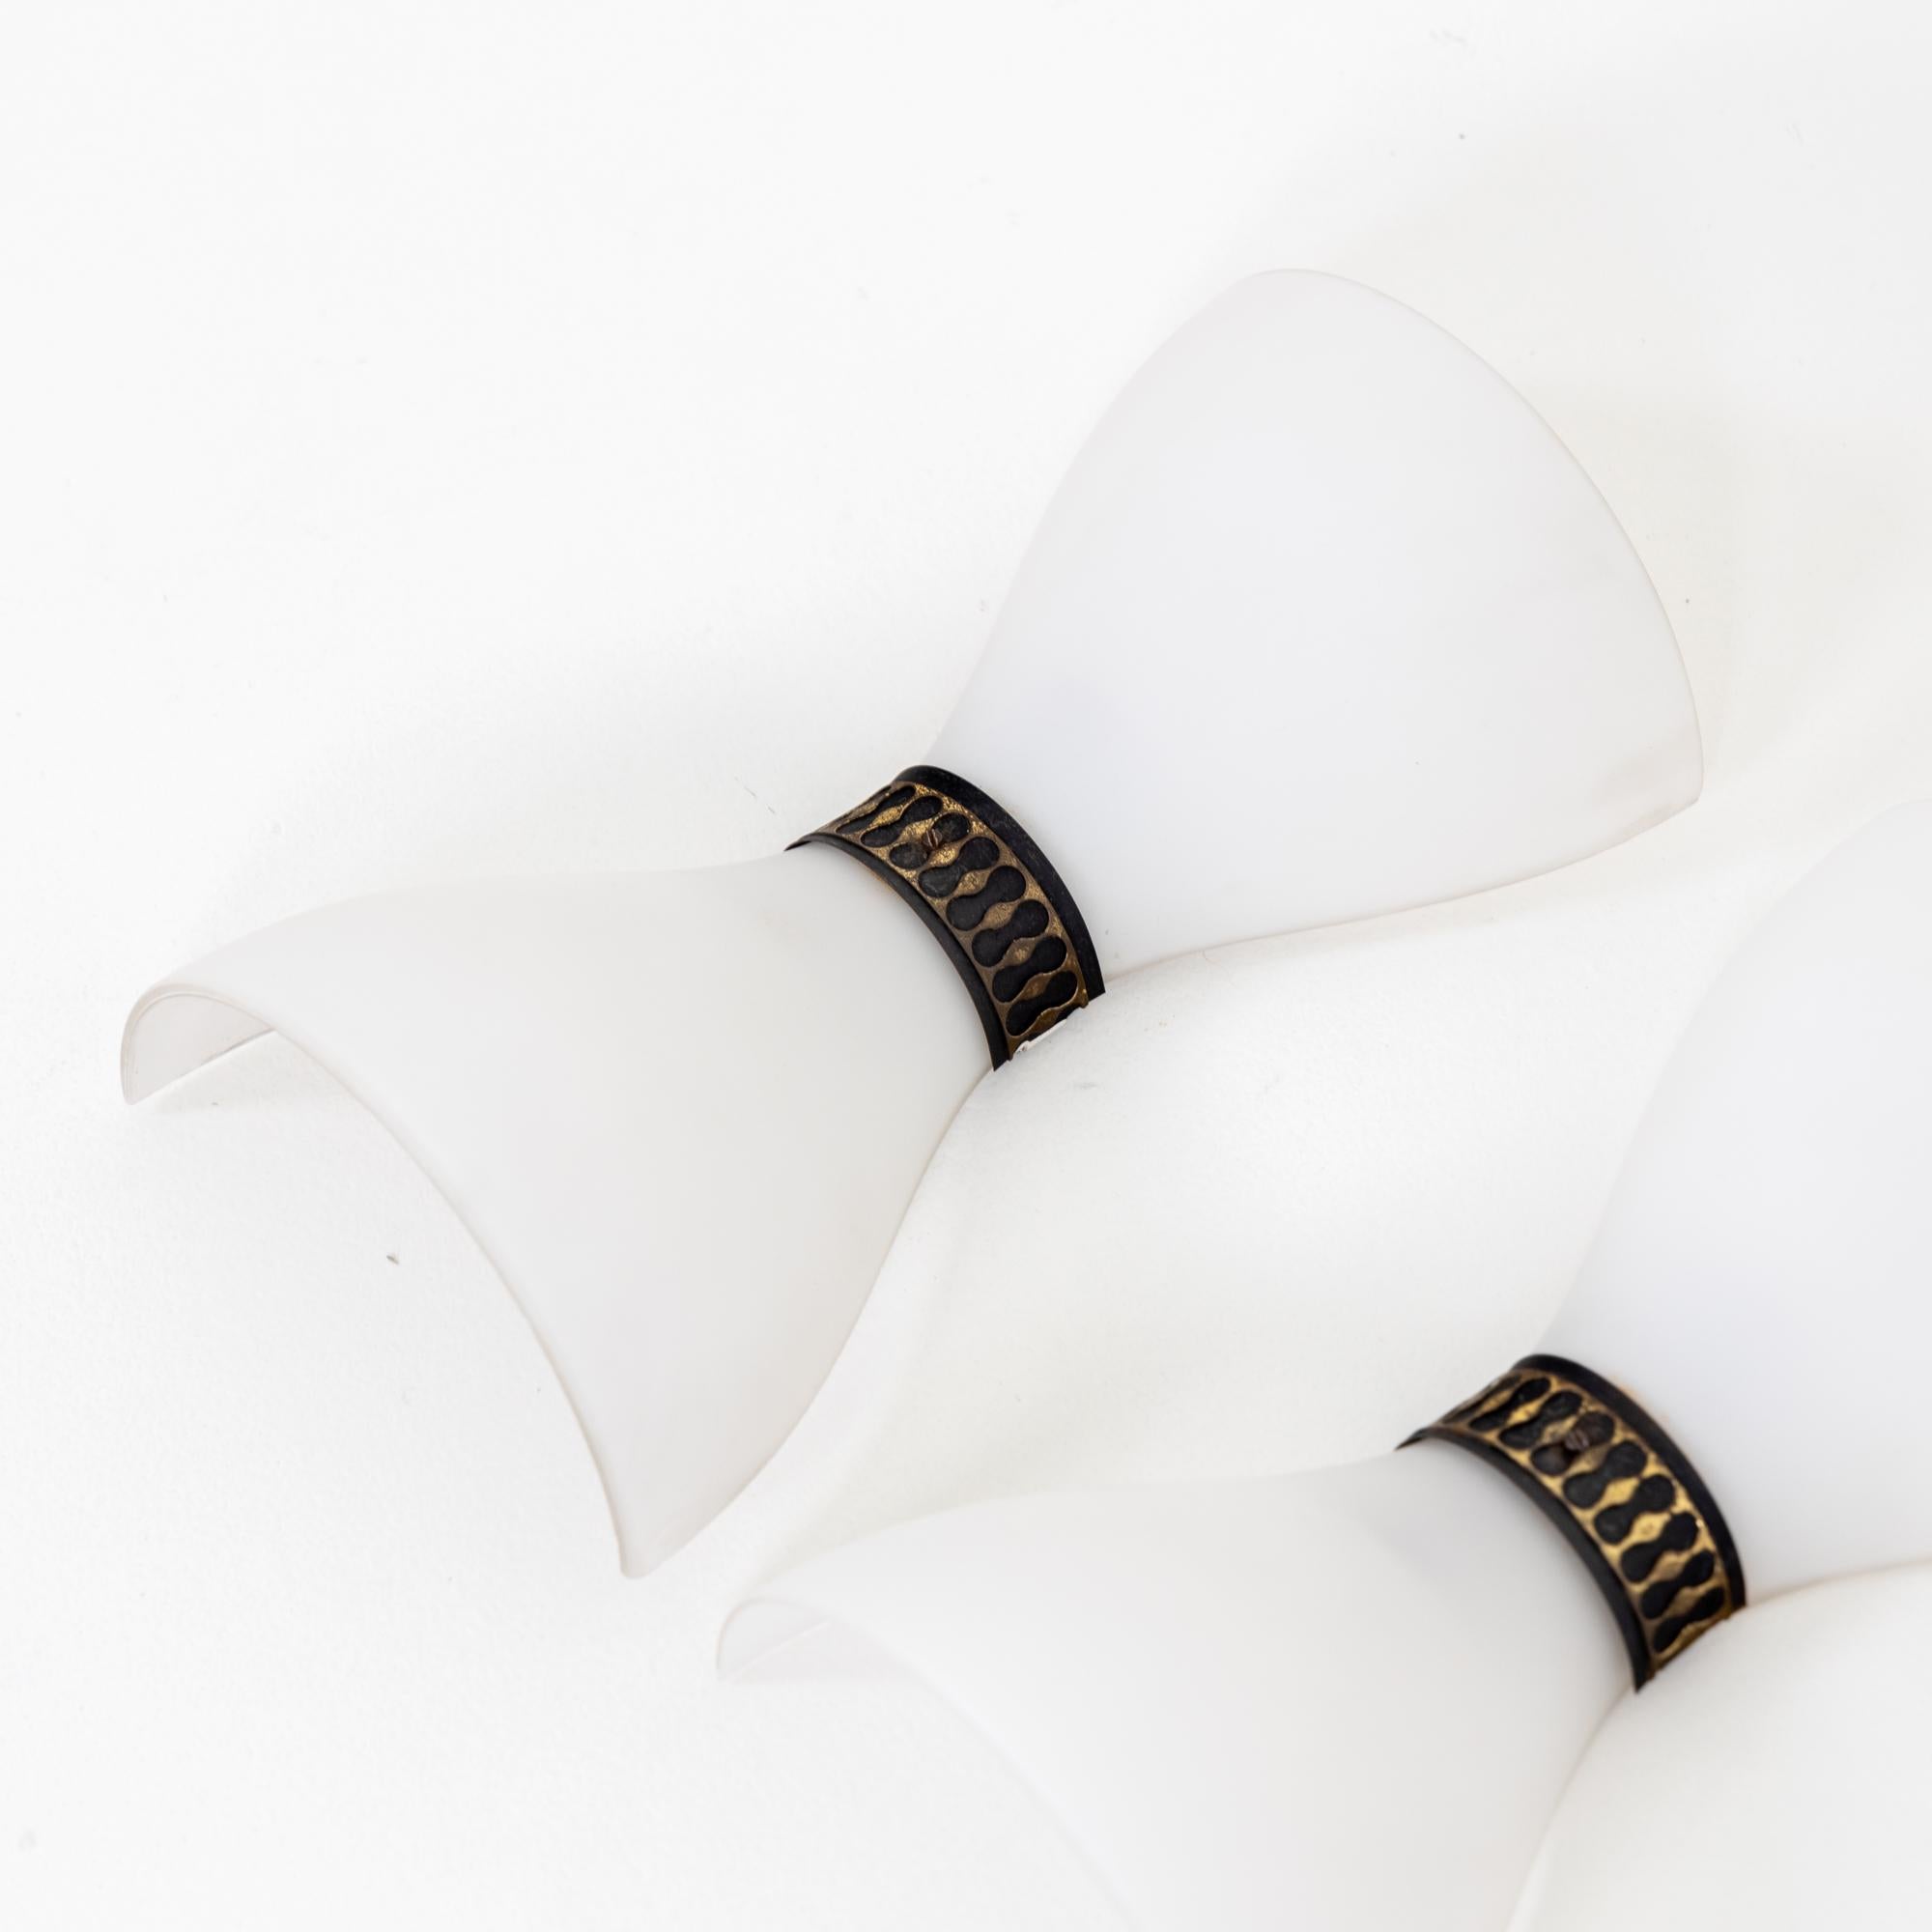 Pair of Bow-Tie Wall Lamps, Opaque Glass, Italian Manufactory, Mid-20th Century For Sale 1